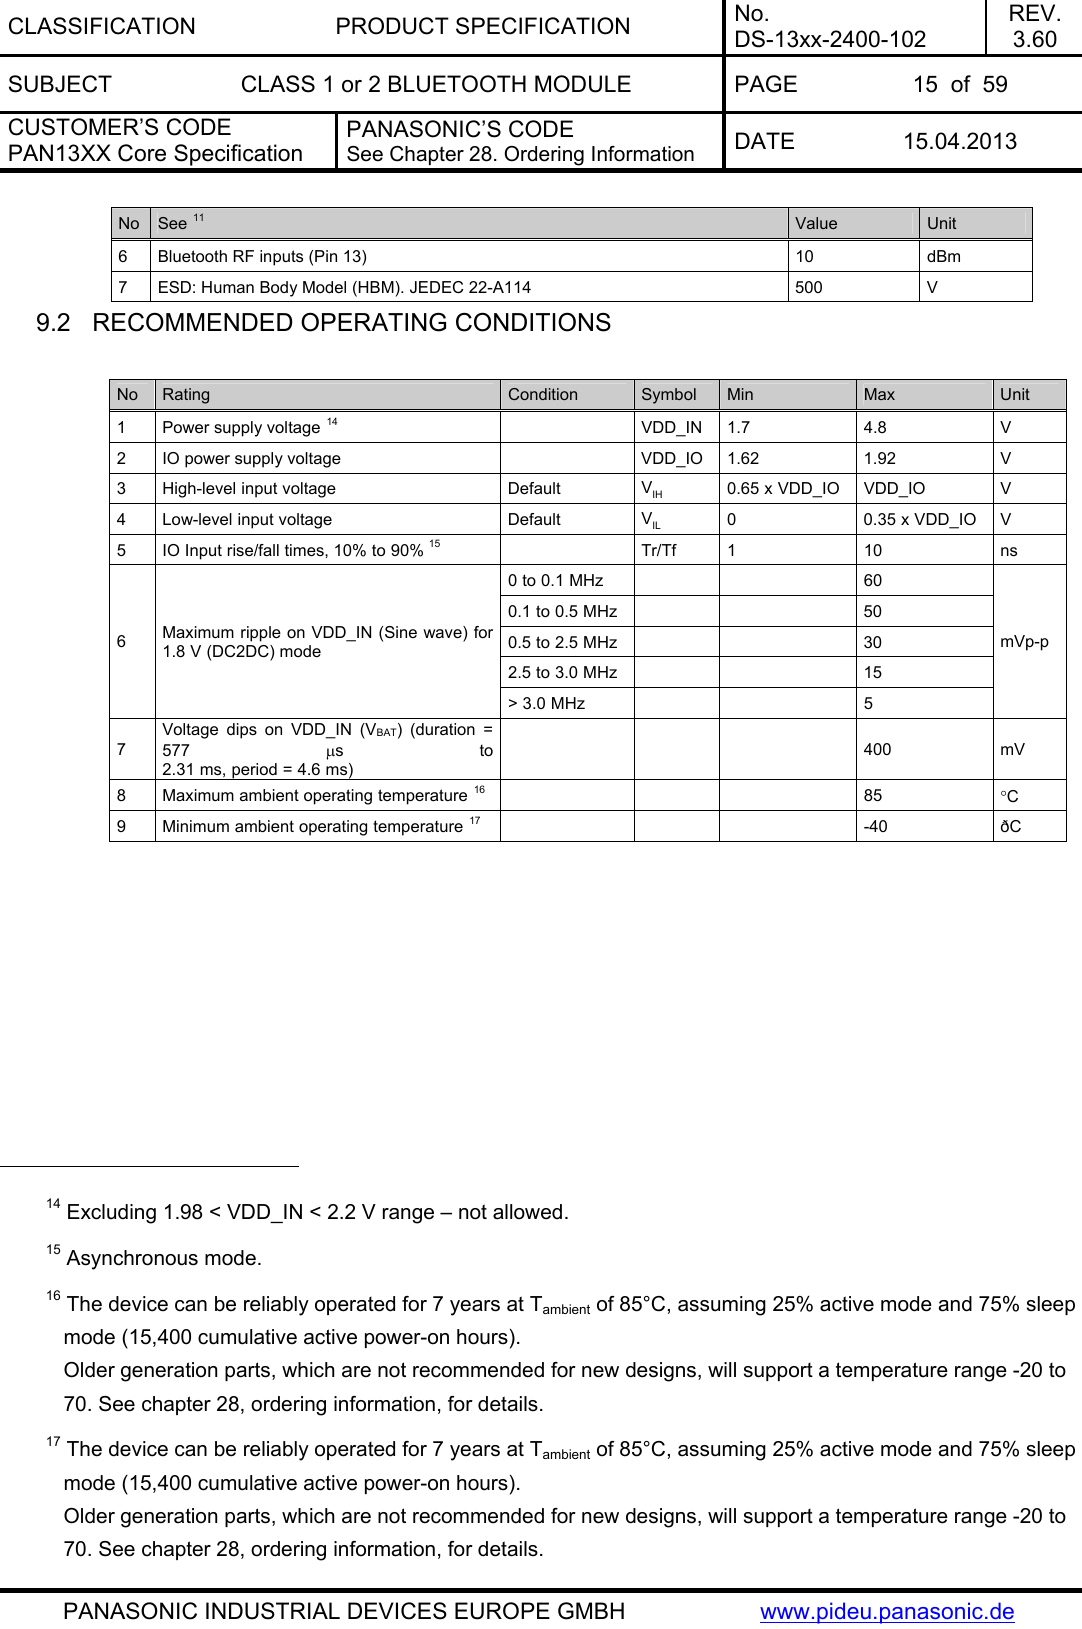 CLASSIFICATION PRODUCT SPECIFICATION No. DS-13xx-2400-102 REV. 3.60 SUBJECT  CLASS 1 or 2 BLUETOOTH MODULE  PAGE  15  of  59 CUSTOMER’S CODE PAN13XX Core Specification PANASONIC’S CODE See Chapter 28. Ordering Information  DATE 15.04.2013   PANASONIC INDUSTRIAL DEVICES EUROPE GMBH  www.pideu.panasonic.de  No  See 11 Value  Unit 6  Bluetooth RF inputs (Pin 13)  10  dBm 7  ESD: Human Body Model (HBM). JEDEC 22-A114  500  V 9.2  RECOMMENDED OPERATING CONDITIONS  No  Rating  Condition  Symbol  Min  Max  Unit 1  Power supply voltage 14  VDD_IN 1.7 4.8 V 2  IO power supply voltage    VDD_IO  1.62  1.92  V 3 High-level input voltage  Default  VIH 0.65 x VDD_IO  VDD_IO  V 4  Low-level input voltage  Default  VIL 0  0.35 x VDD_IO  V 5  IO Input rise/fall times, 10% to 90%  15   Tr/Tf 1  10  ns 0 to 0.1 MHz      60 0.1 to 0.5 MHz      50 0.5 to 2.5 MHz      30 2.5 to 3.0 MHz      15 6  Maximum ripple on VDD_IN (Sine wave) for 1.8 V (DC2DC) mode &gt; 3.0 MHz      5 mVp-p 7 Voltage dips on VDD_IN (VBAT) (duration = 577  μs to2.31 ms, period = 4.6 ms)     400 mV 8  Maximum ambient operating temperature 16       85  °C 9  Minimum ambient operating temperature 17       -40  ðC                                                           14 Excluding 1.98 &lt; VDD_IN &lt; 2.2 V range – not allowed. 15 Asynchronous mode. 16 The device can be reliably operated for 7 years at Tambient of 85°C, assuming 25% active mode and 75% sleep mode (15,400 cumulative active power-on hours). Older generation parts, which are not recommended for new designs, will support a temperature range -20 to 70. See chapter 28, ordering information, for details. 17 The device can be reliably operated for 7 years at Tambient of 85°C, assuming 25% active mode and 75% sleep mode (15,400 cumulative active power-on hours). Older generation parts, which are not recommended for new designs, will support a temperature range -20 to 70. See chapter 28, ordering information, for details. 